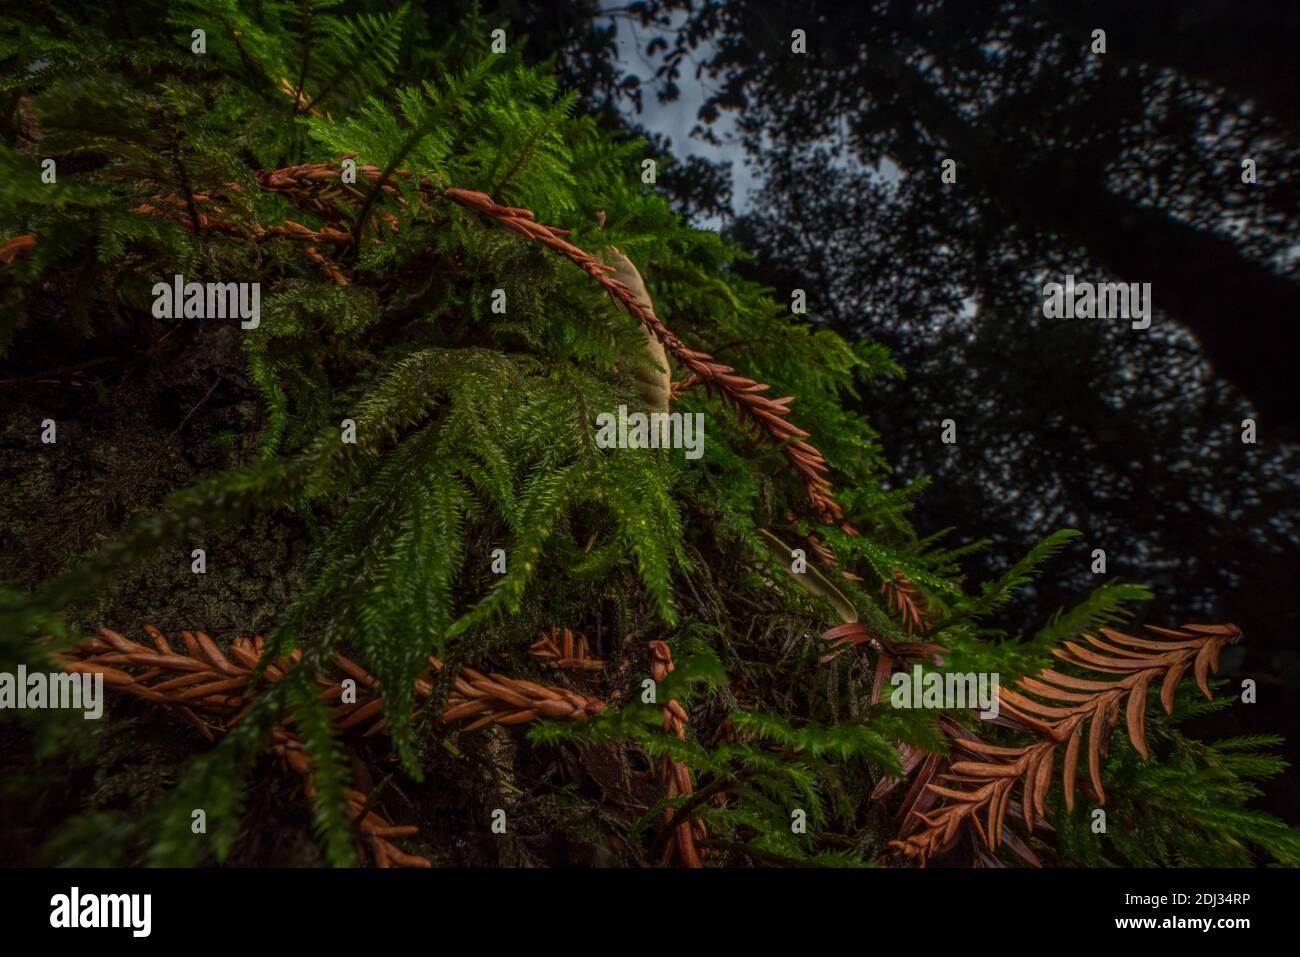 The moss covered redwood forest of the Santa Cruz mountains in California. Stock Photo